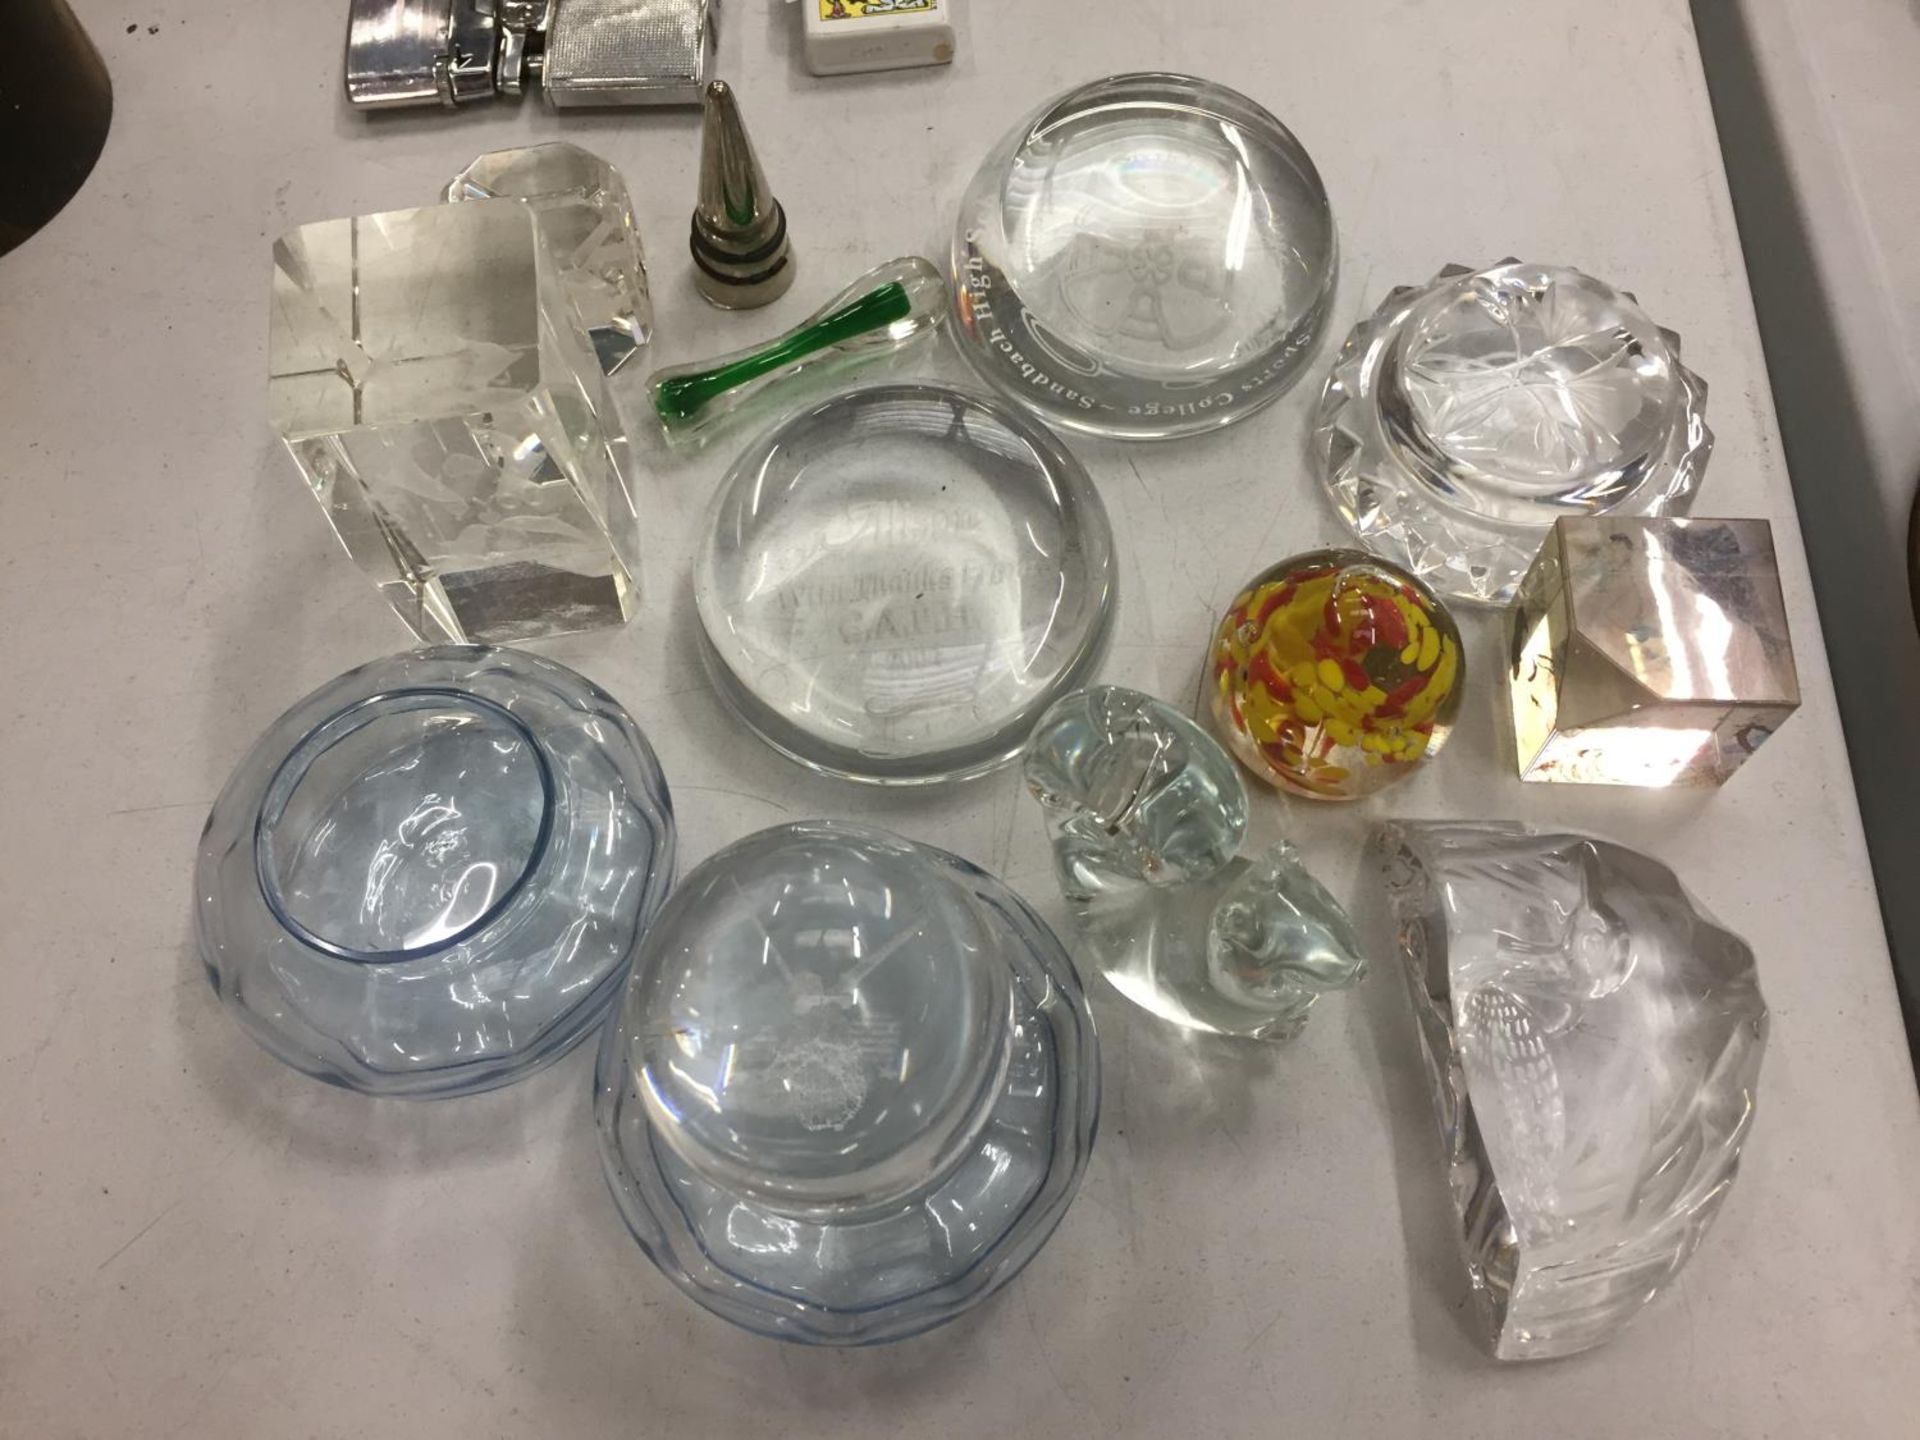 A COLLECTION OF GLASS PAPERWEIGHTS OF VARIOUS DESIGNS